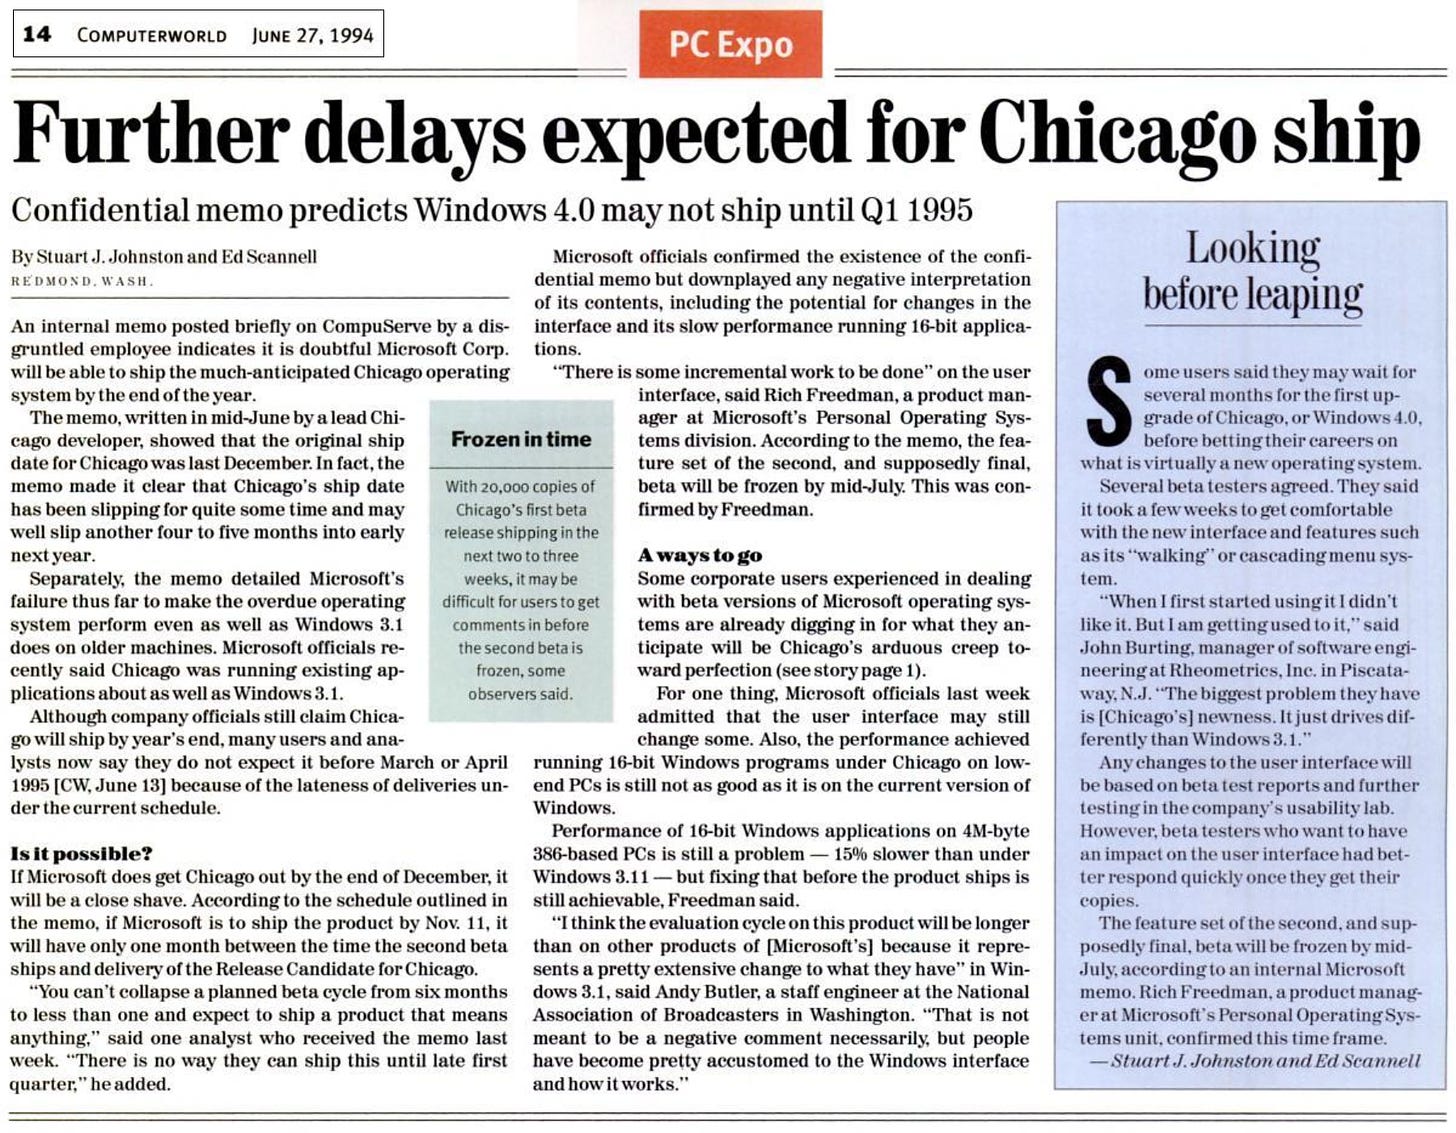 Further delays expected for Chicago -big article from June 27, 1994.